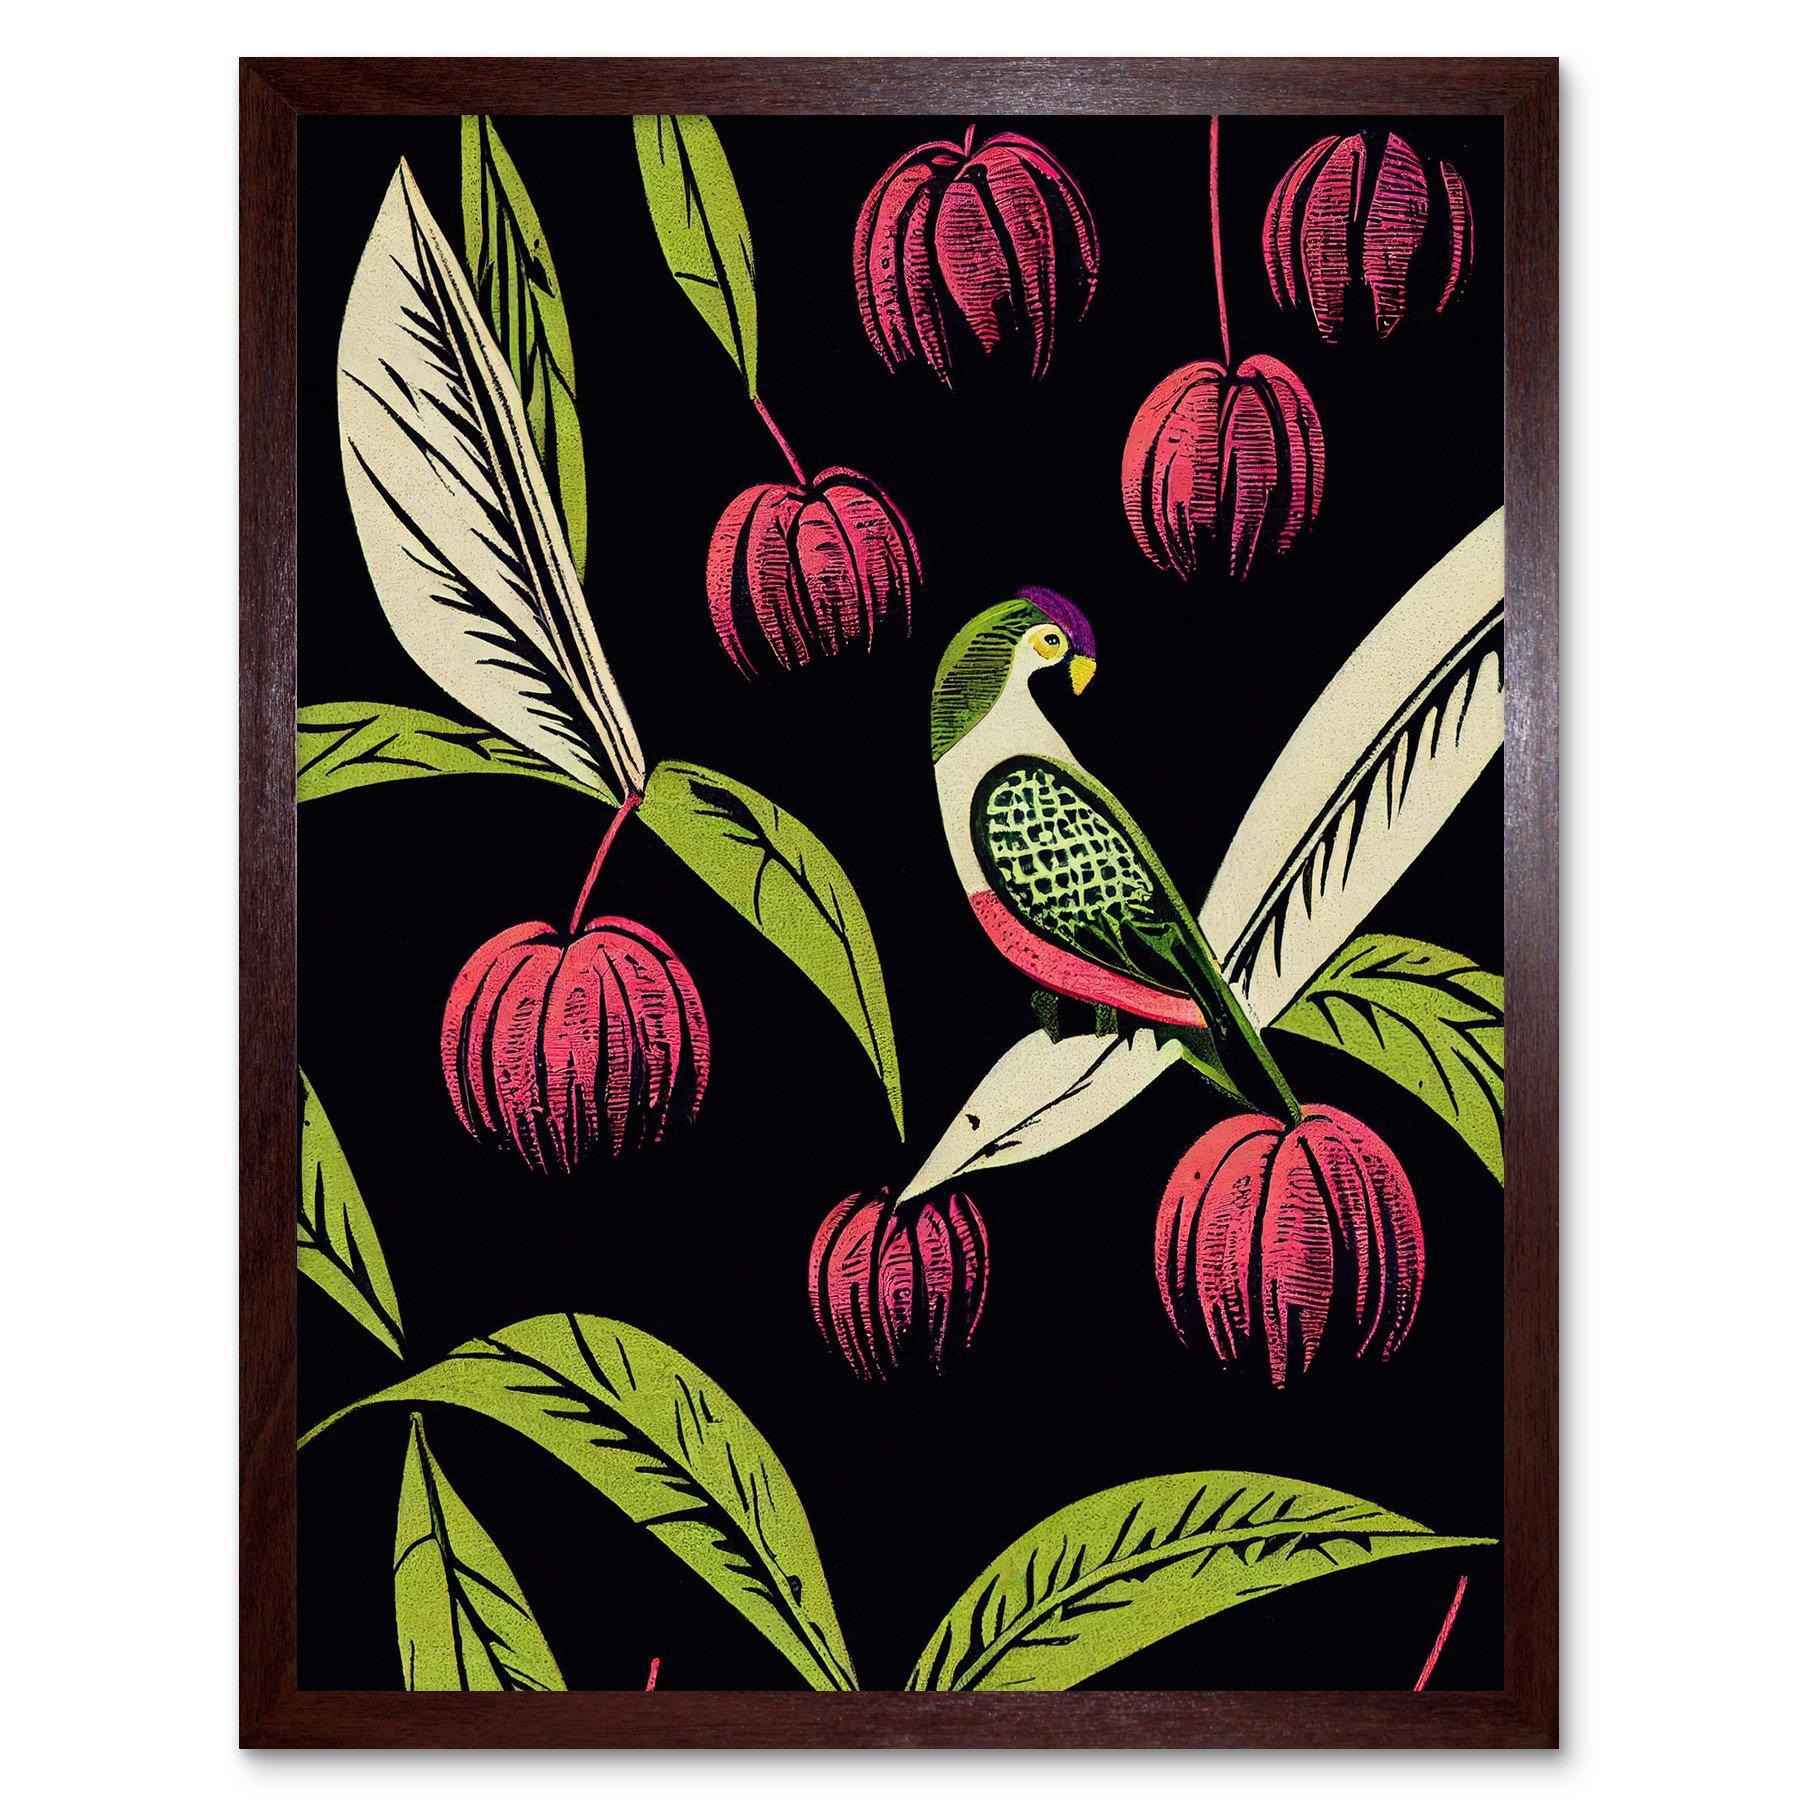 Parrot in Tree Fruit Bright Green and Pink Black Colour Linocut Illustration Modern Vintage Art Print Framed Poster Wall Decor 12x16 inch - image 1